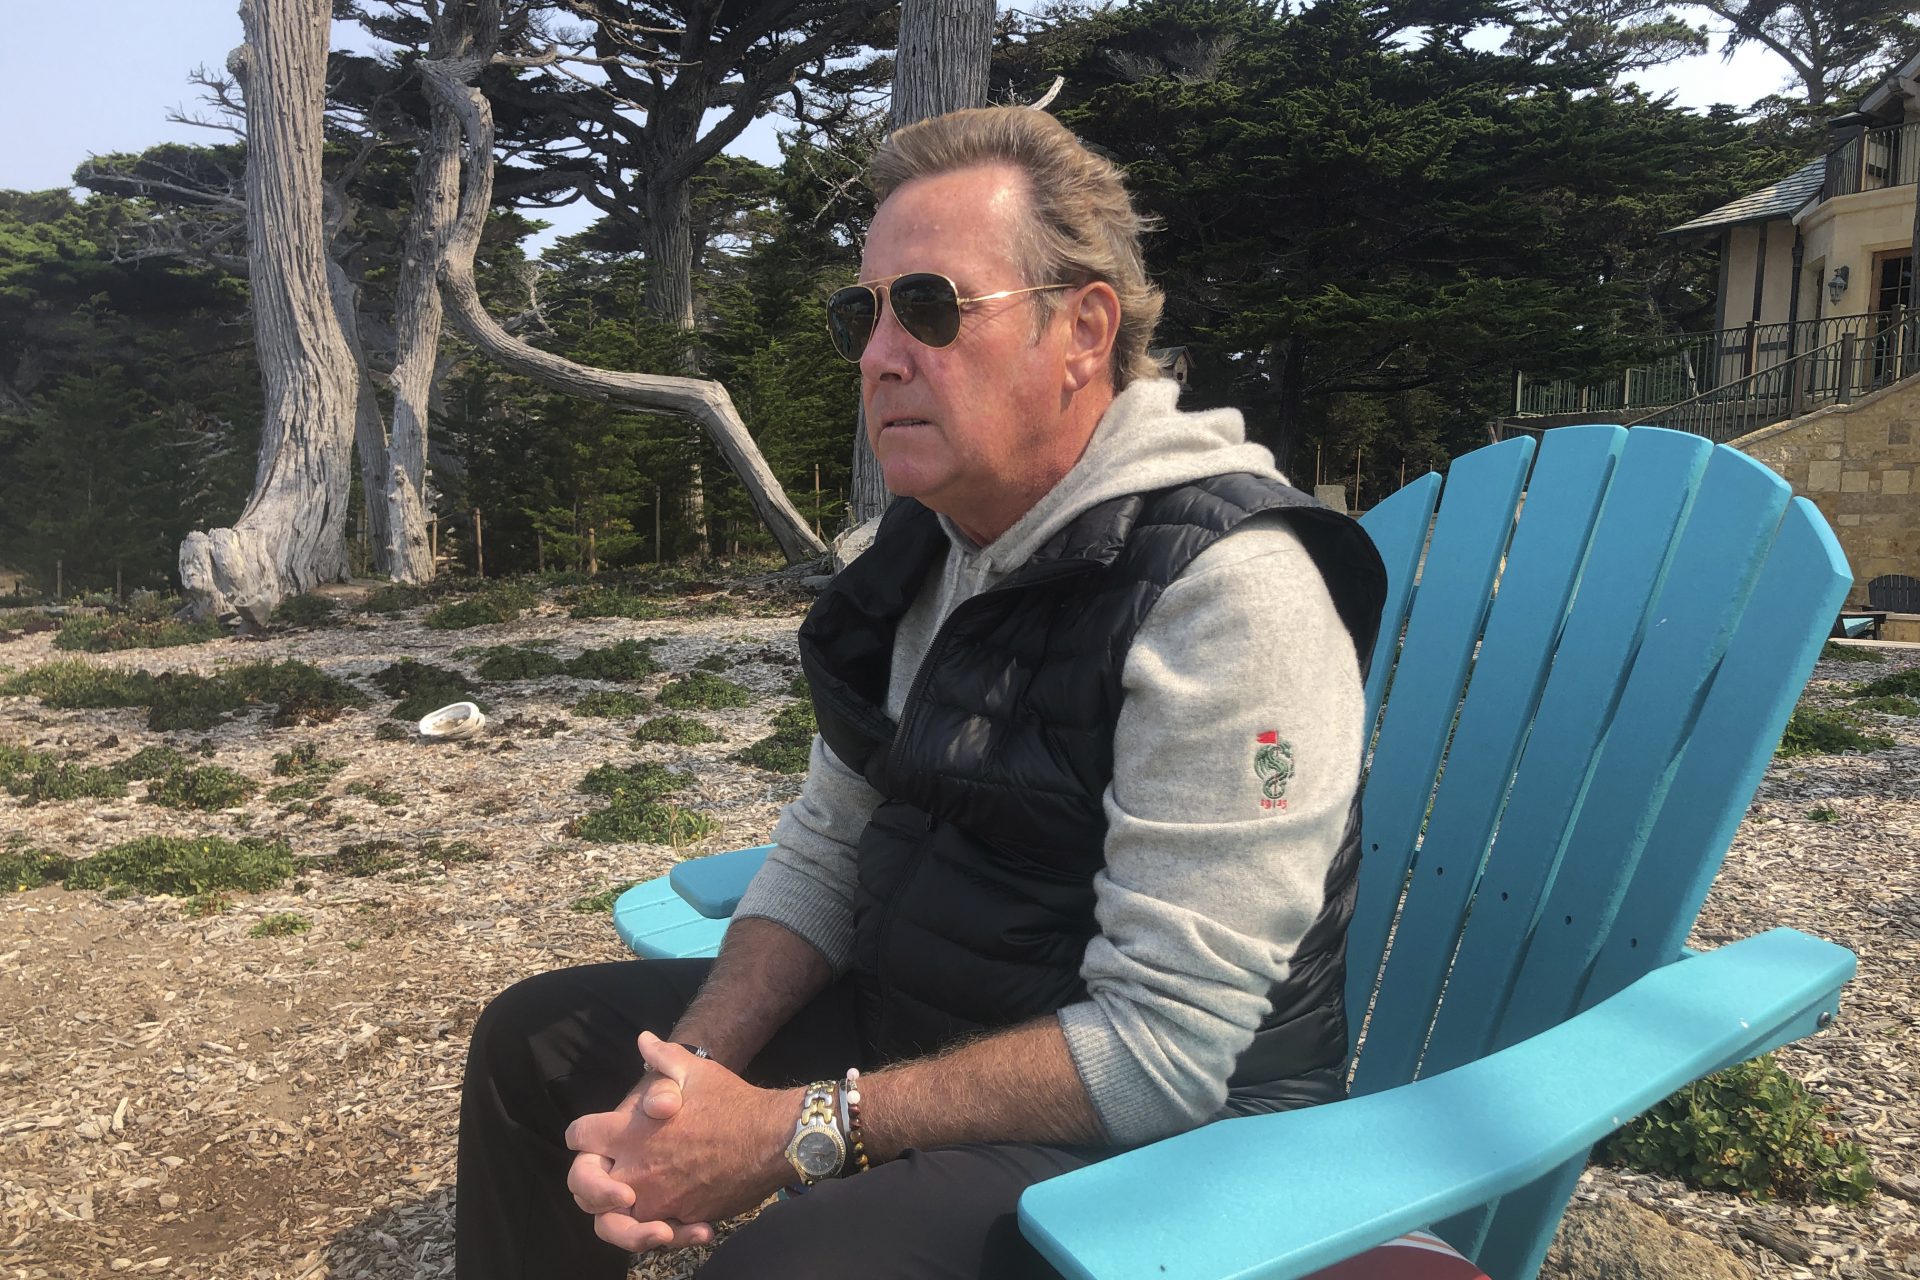 Jack Grandcolas, who lost his pregnant wife on United Flight 93, sits and looks out at the ocean near his home in Pebble Beach, Calif., Aug. 18, 2021. Twenty years later, Grandcolas still remembers waking up at 7:03 that morning. He looked at the clock, then out the window where an image in the sky caught his eye — a fleeting vision that looked like an angel ascending. He didn't know it yet, but that was the moment his life changed.